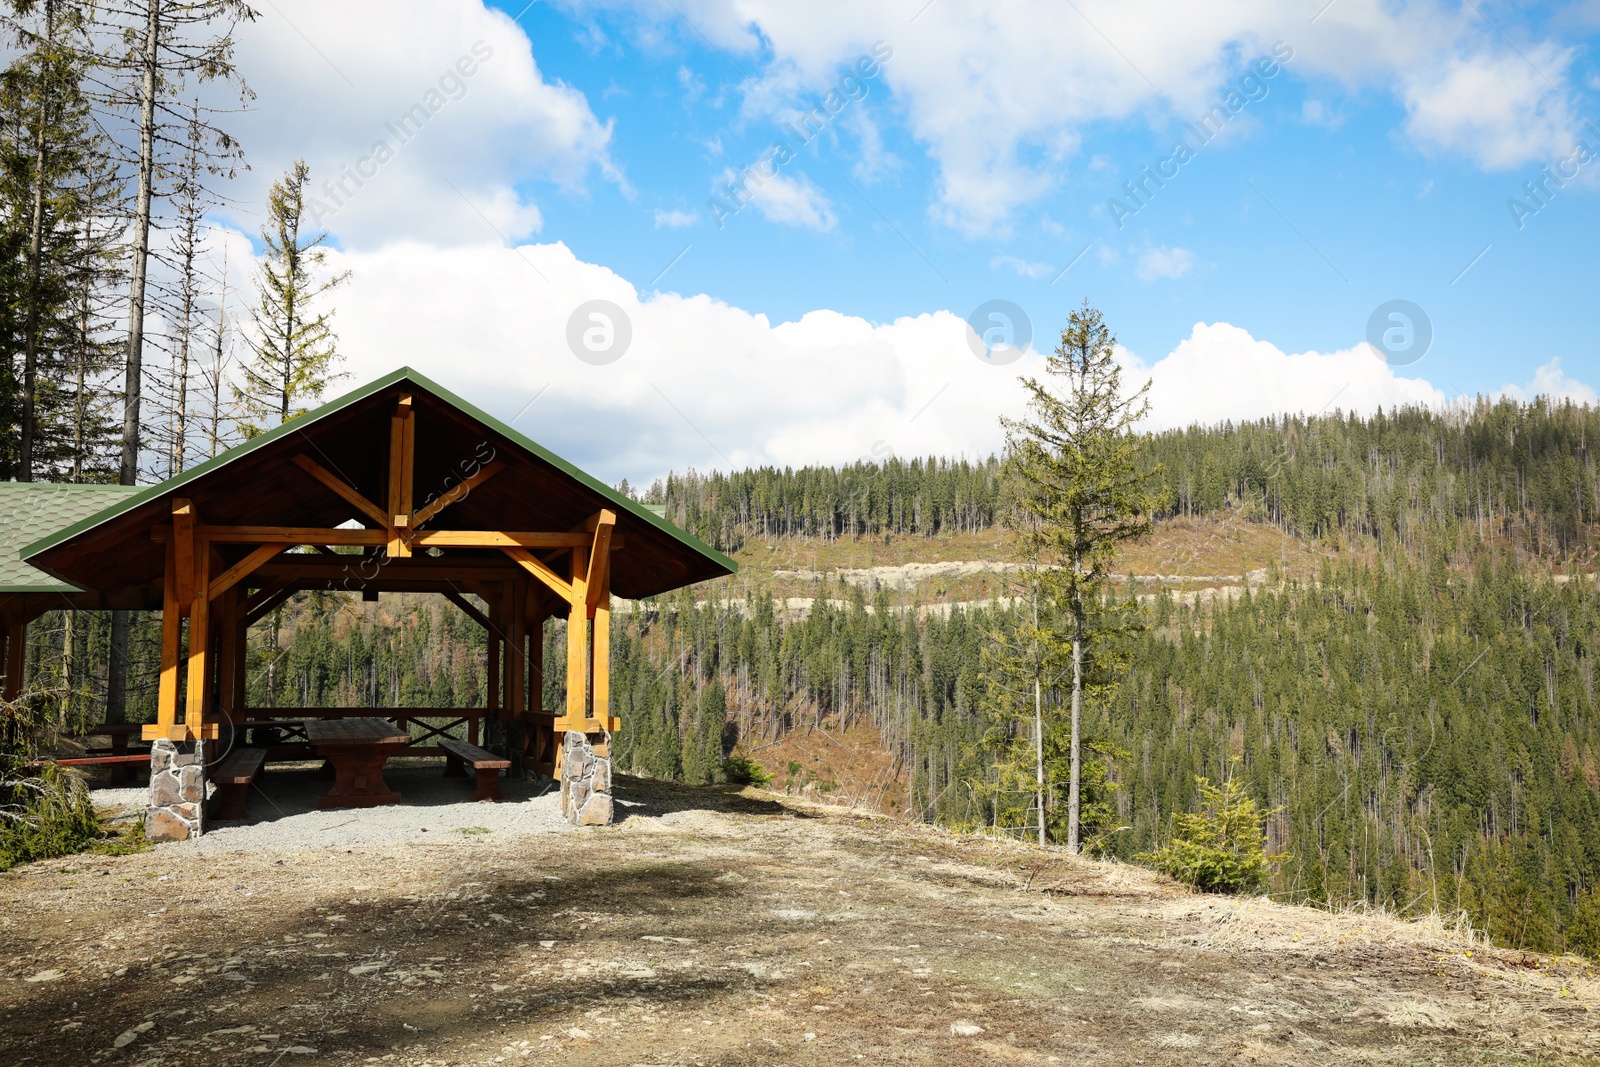 Photo of Wooden gazebo with table and benches near forest in mountains. Space for text